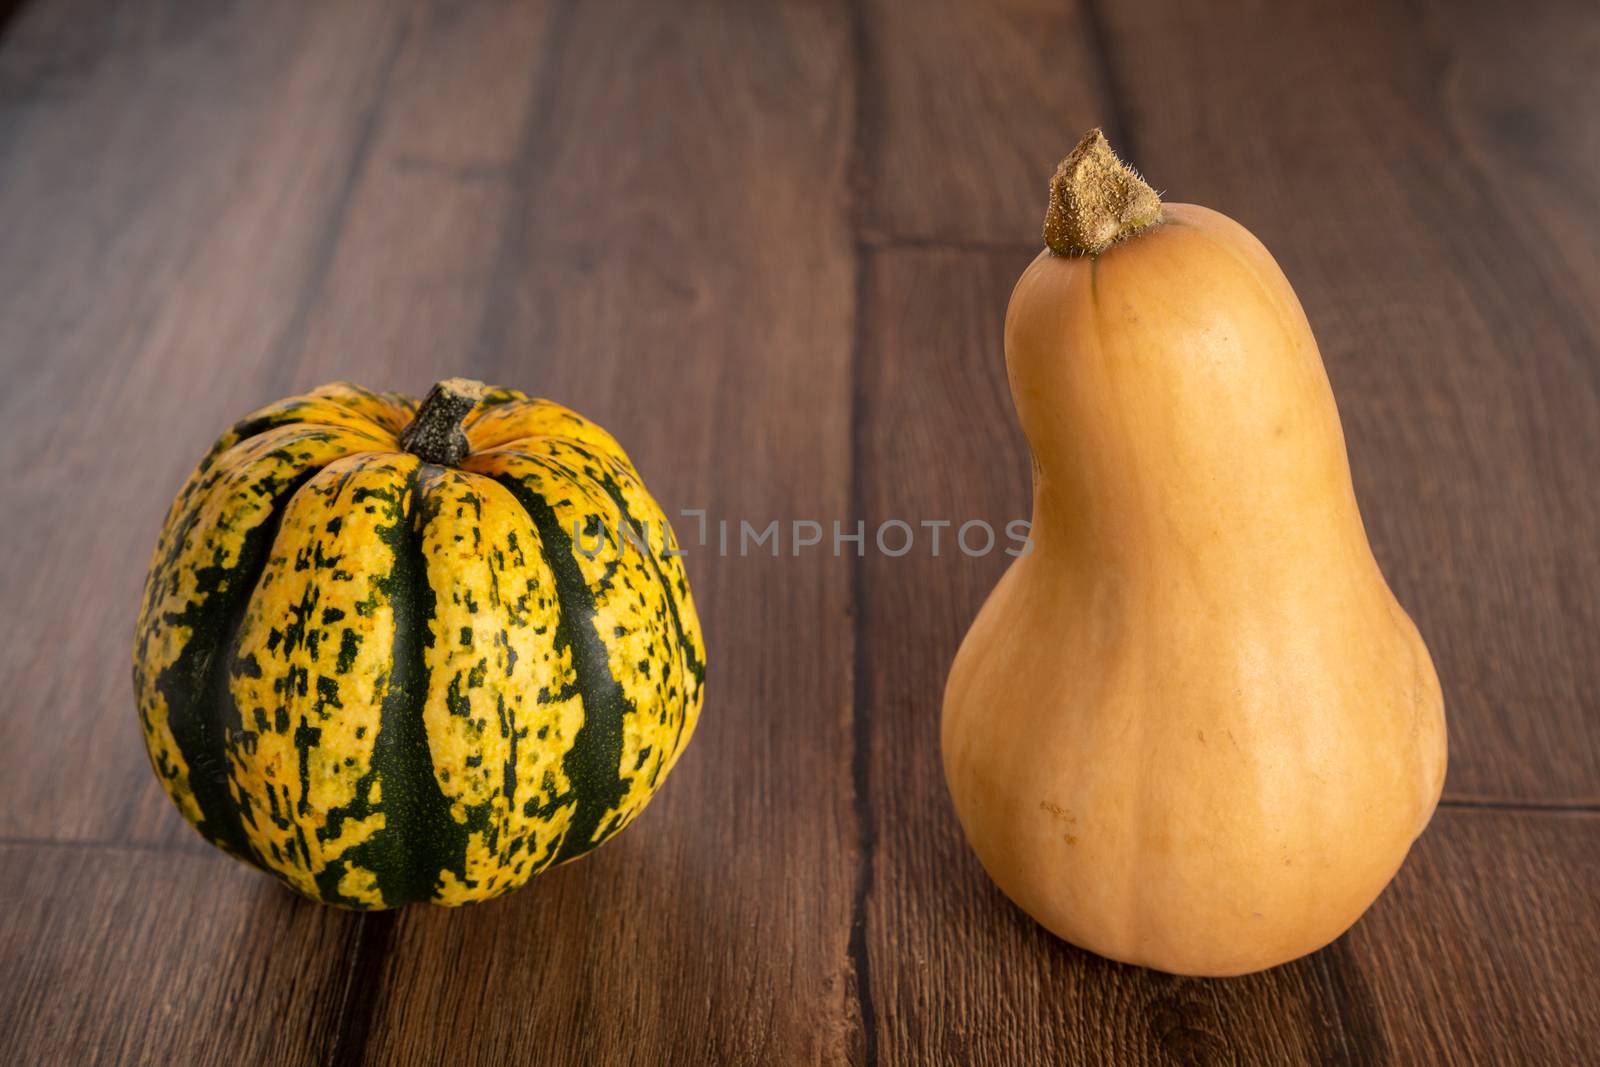 Colored beautiful pumpkin lies on a wooden background.